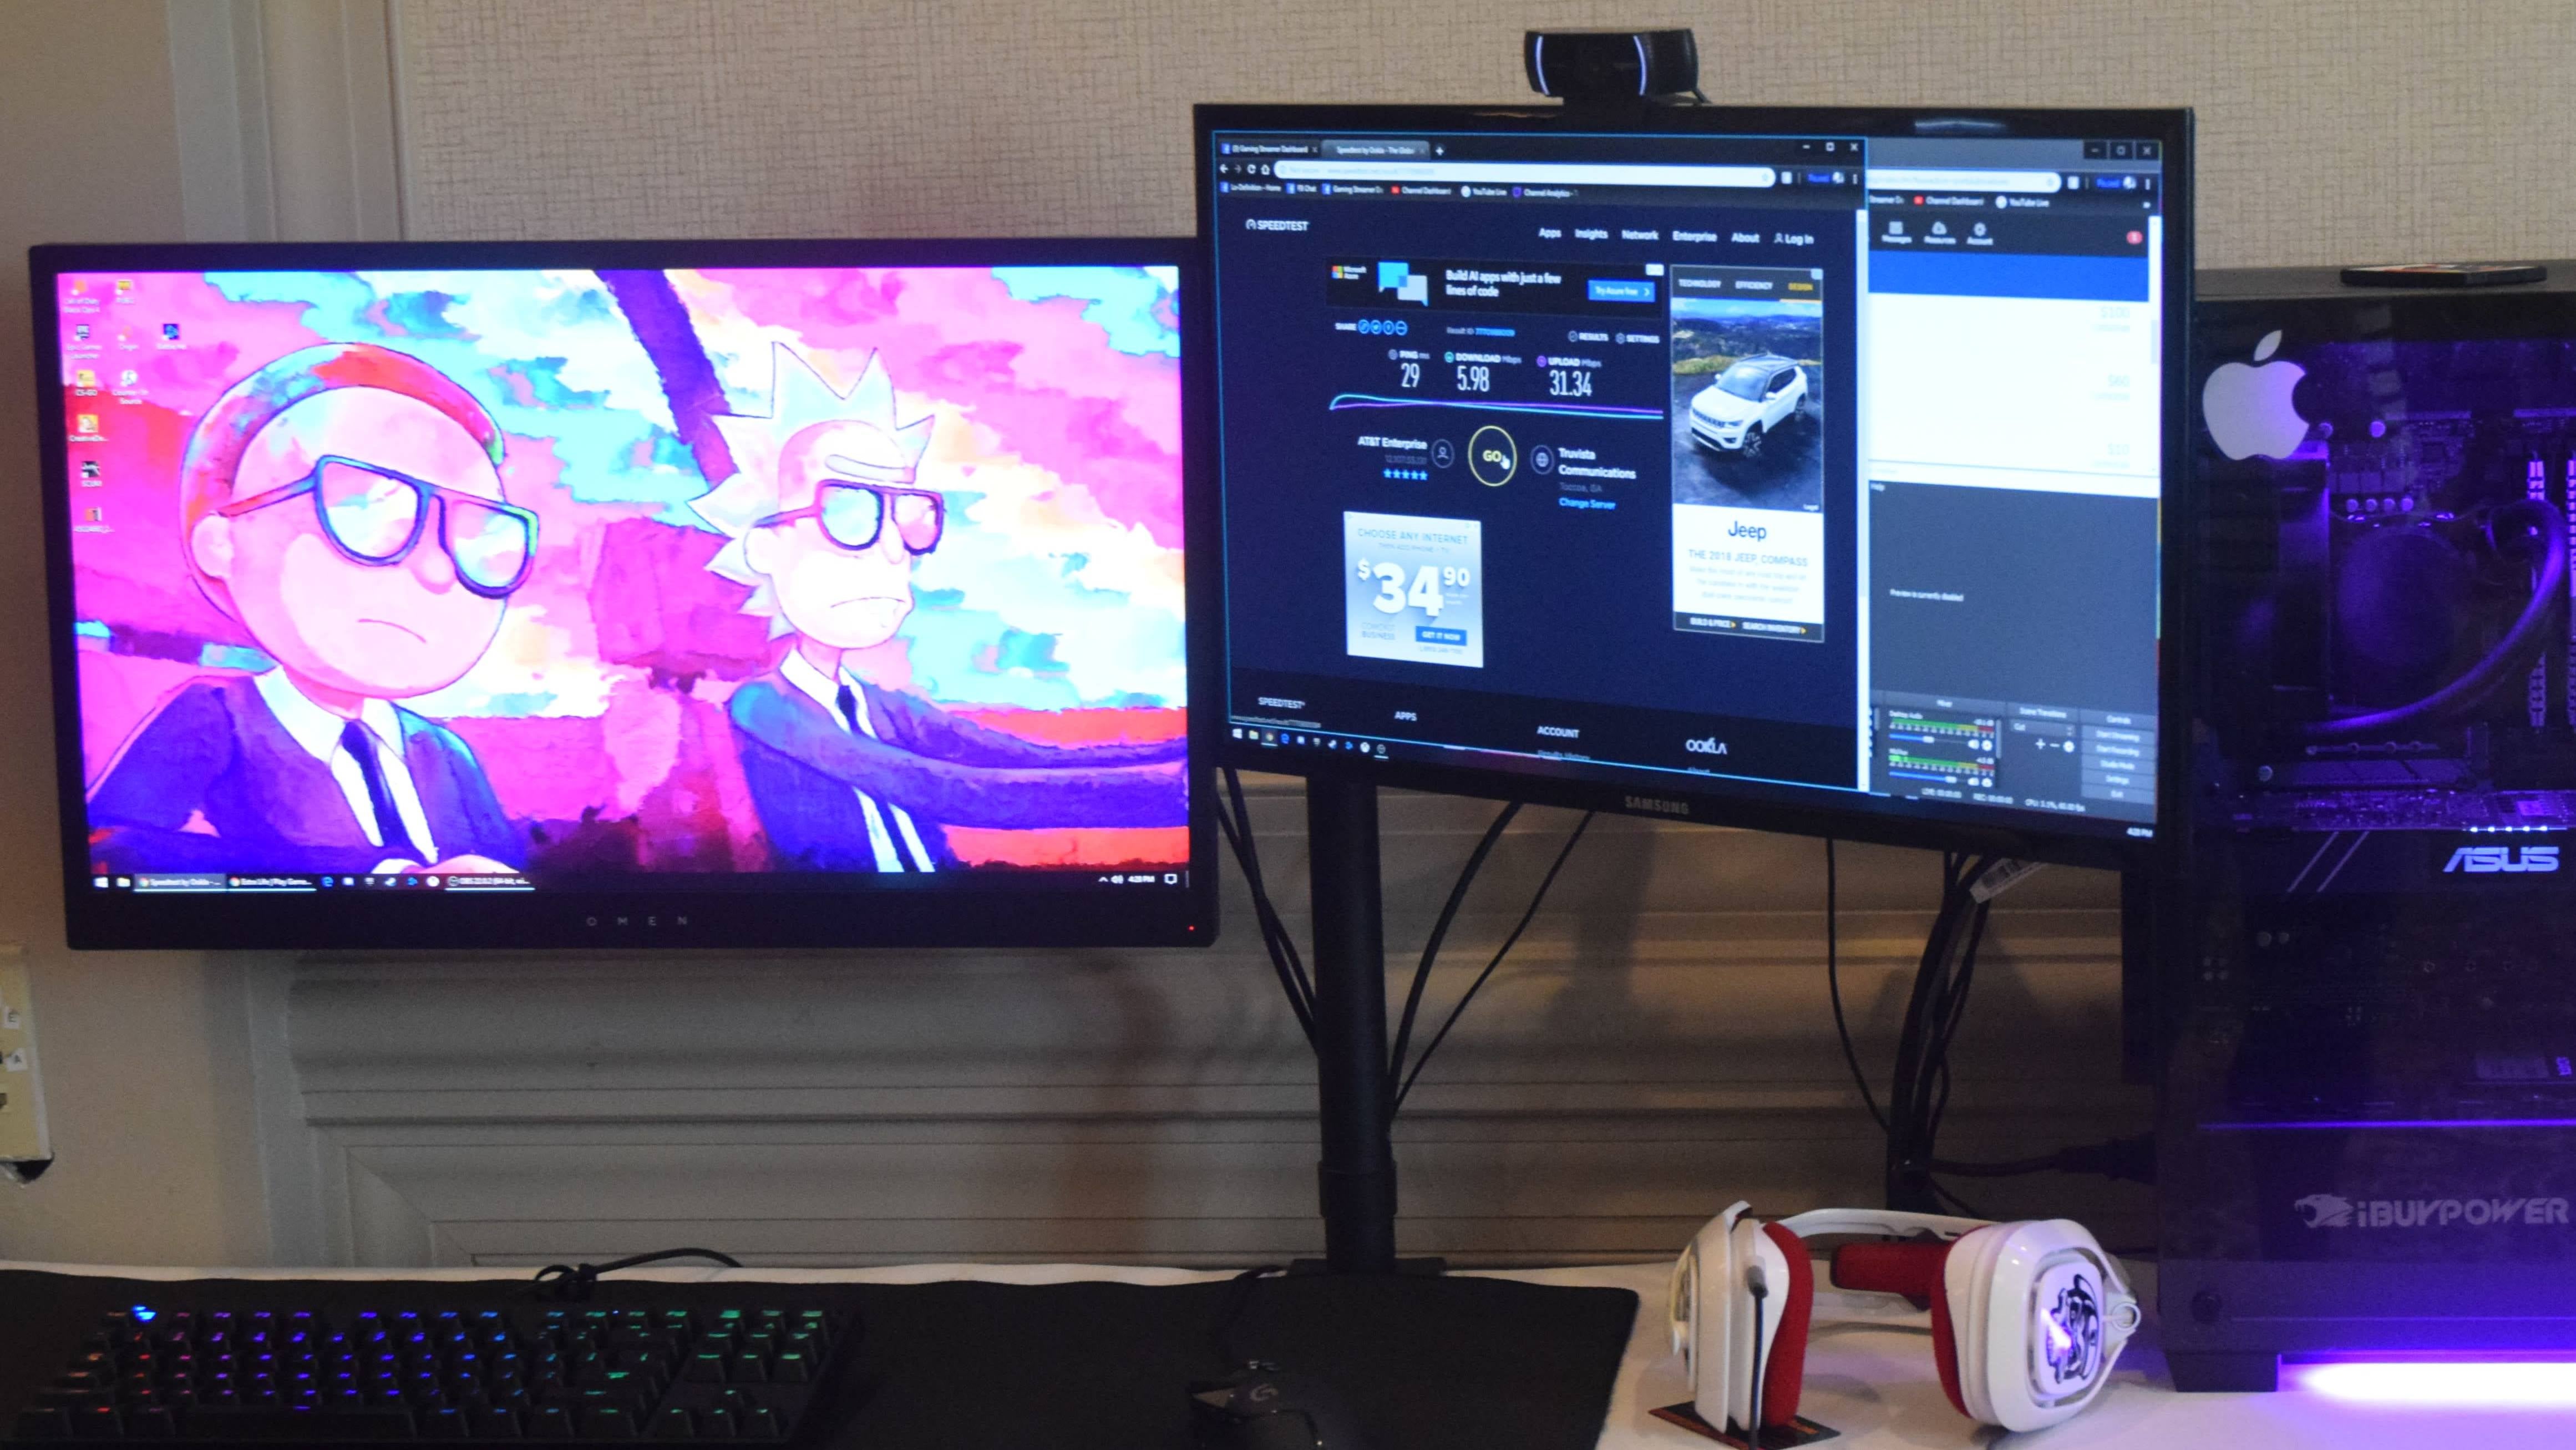 How Do You Extend Your Display Across Two Monitors?